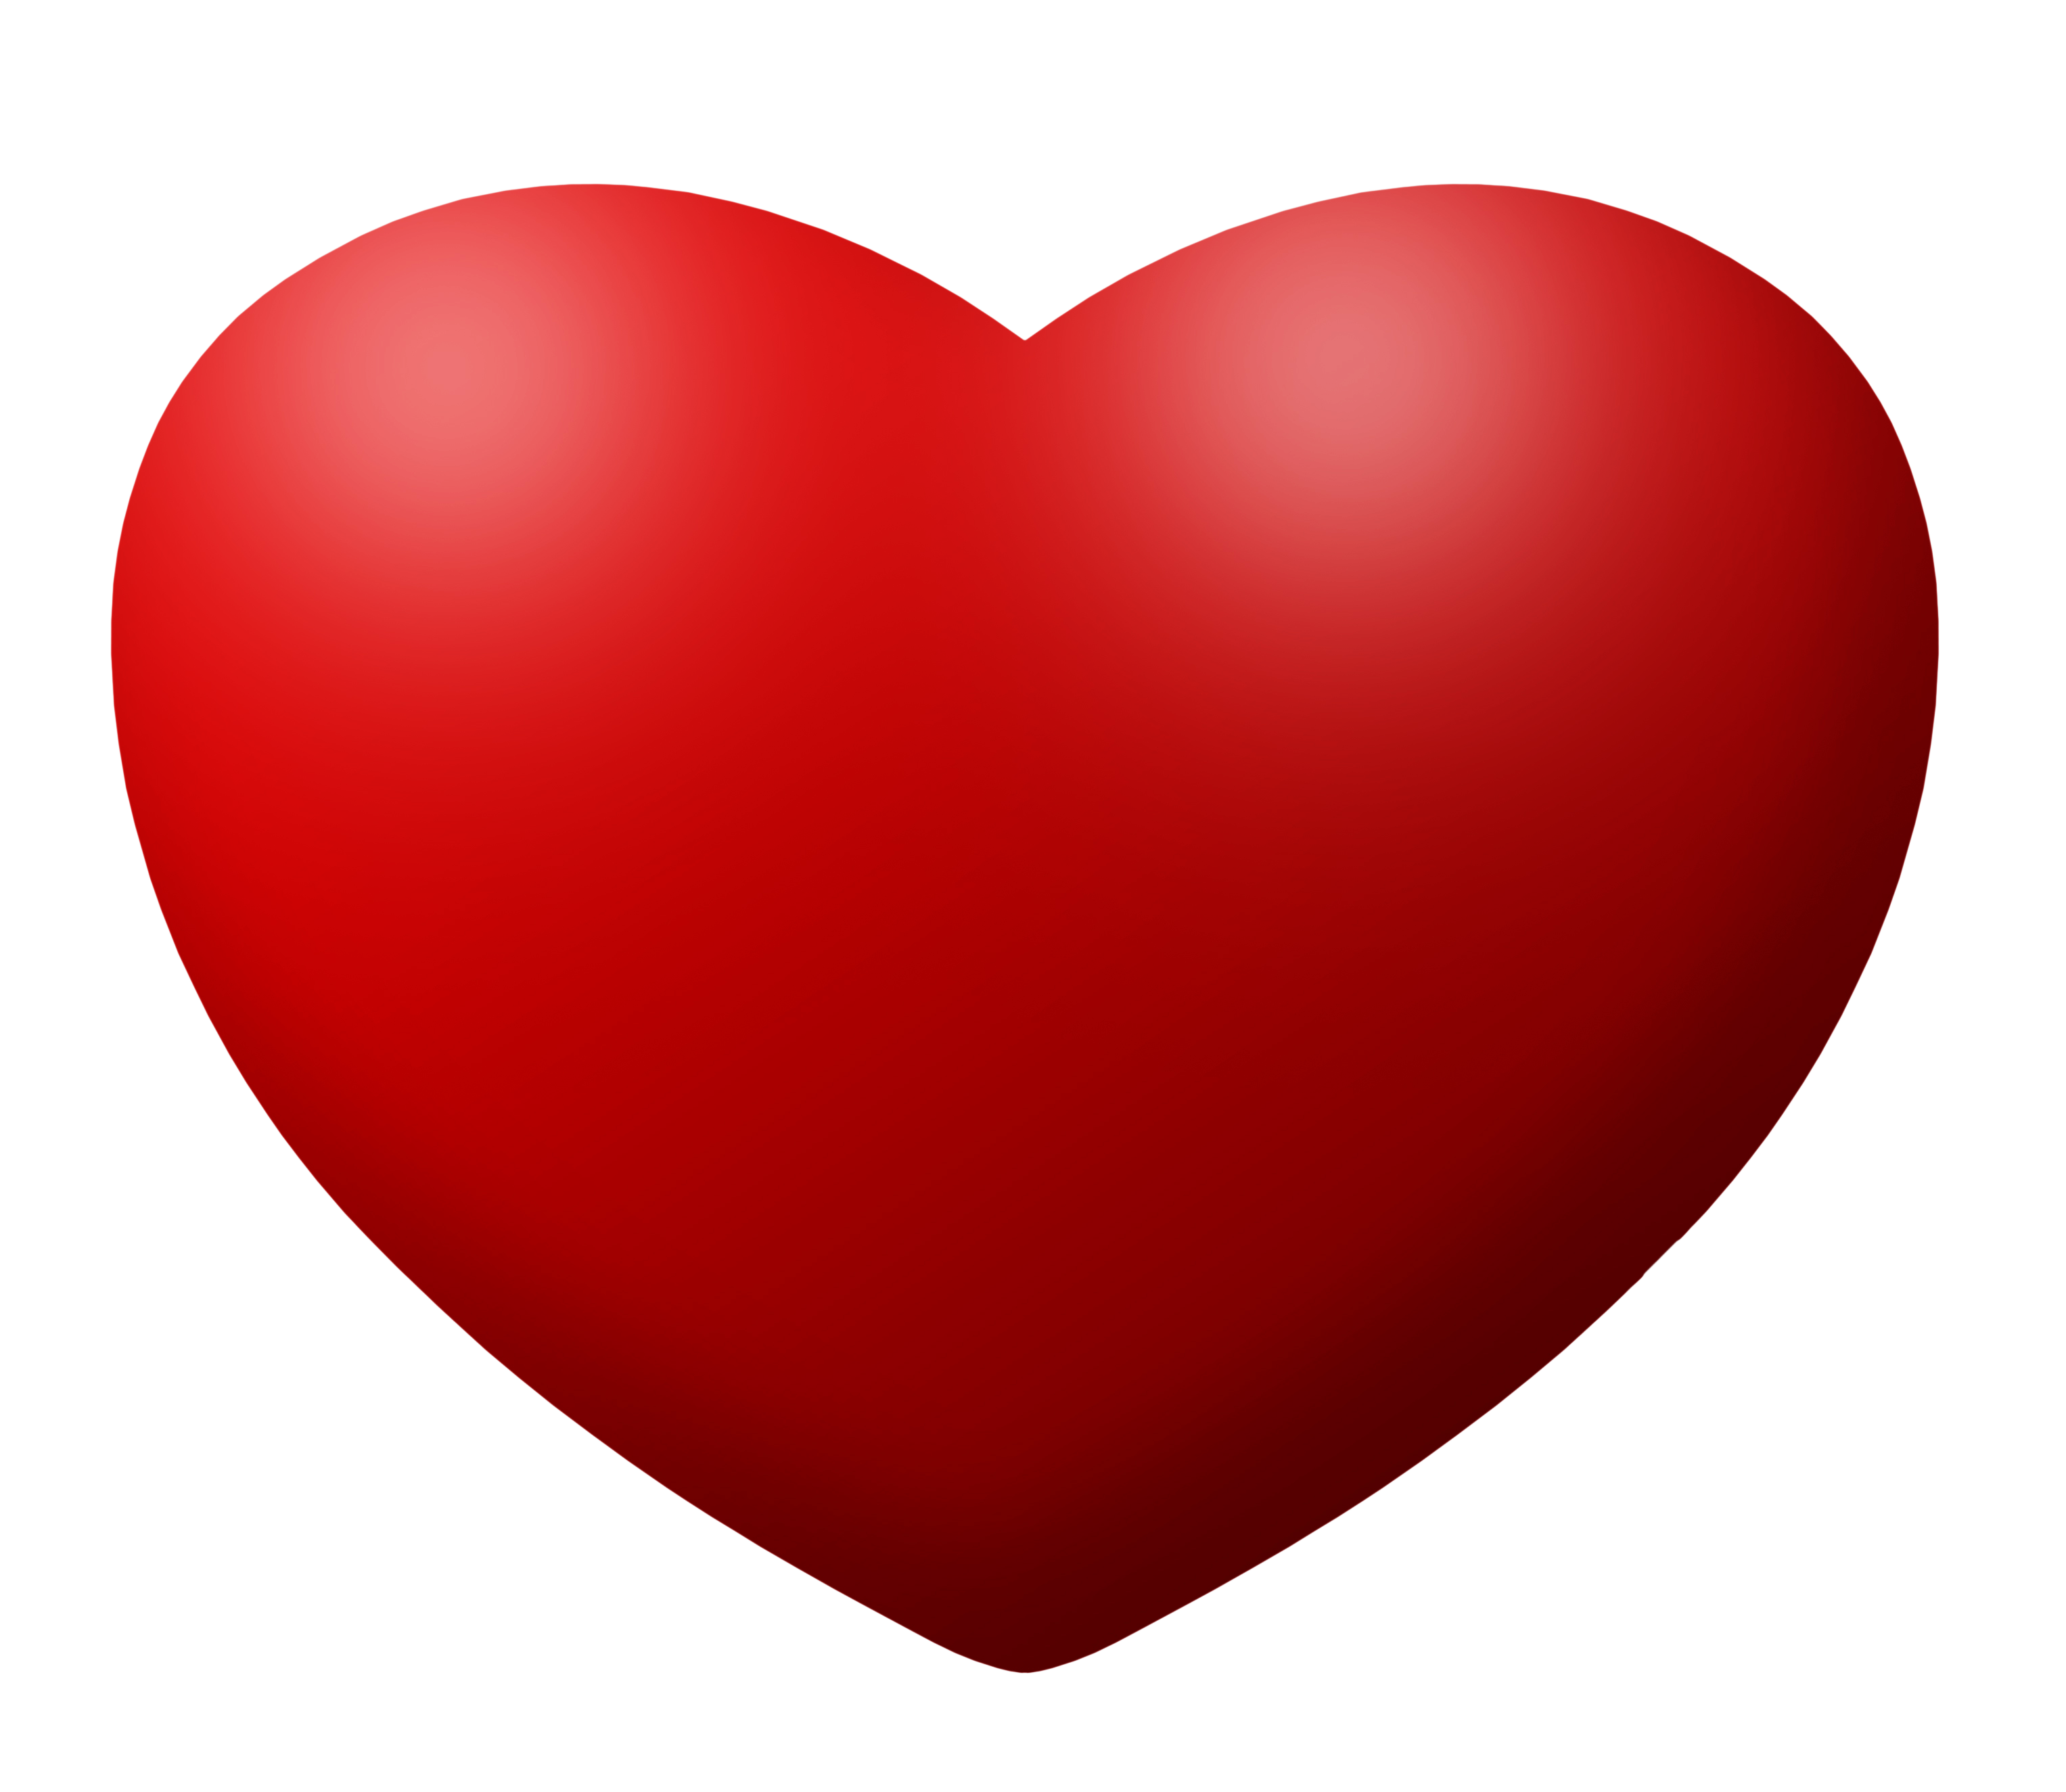 heart-images-free-cliparts-co